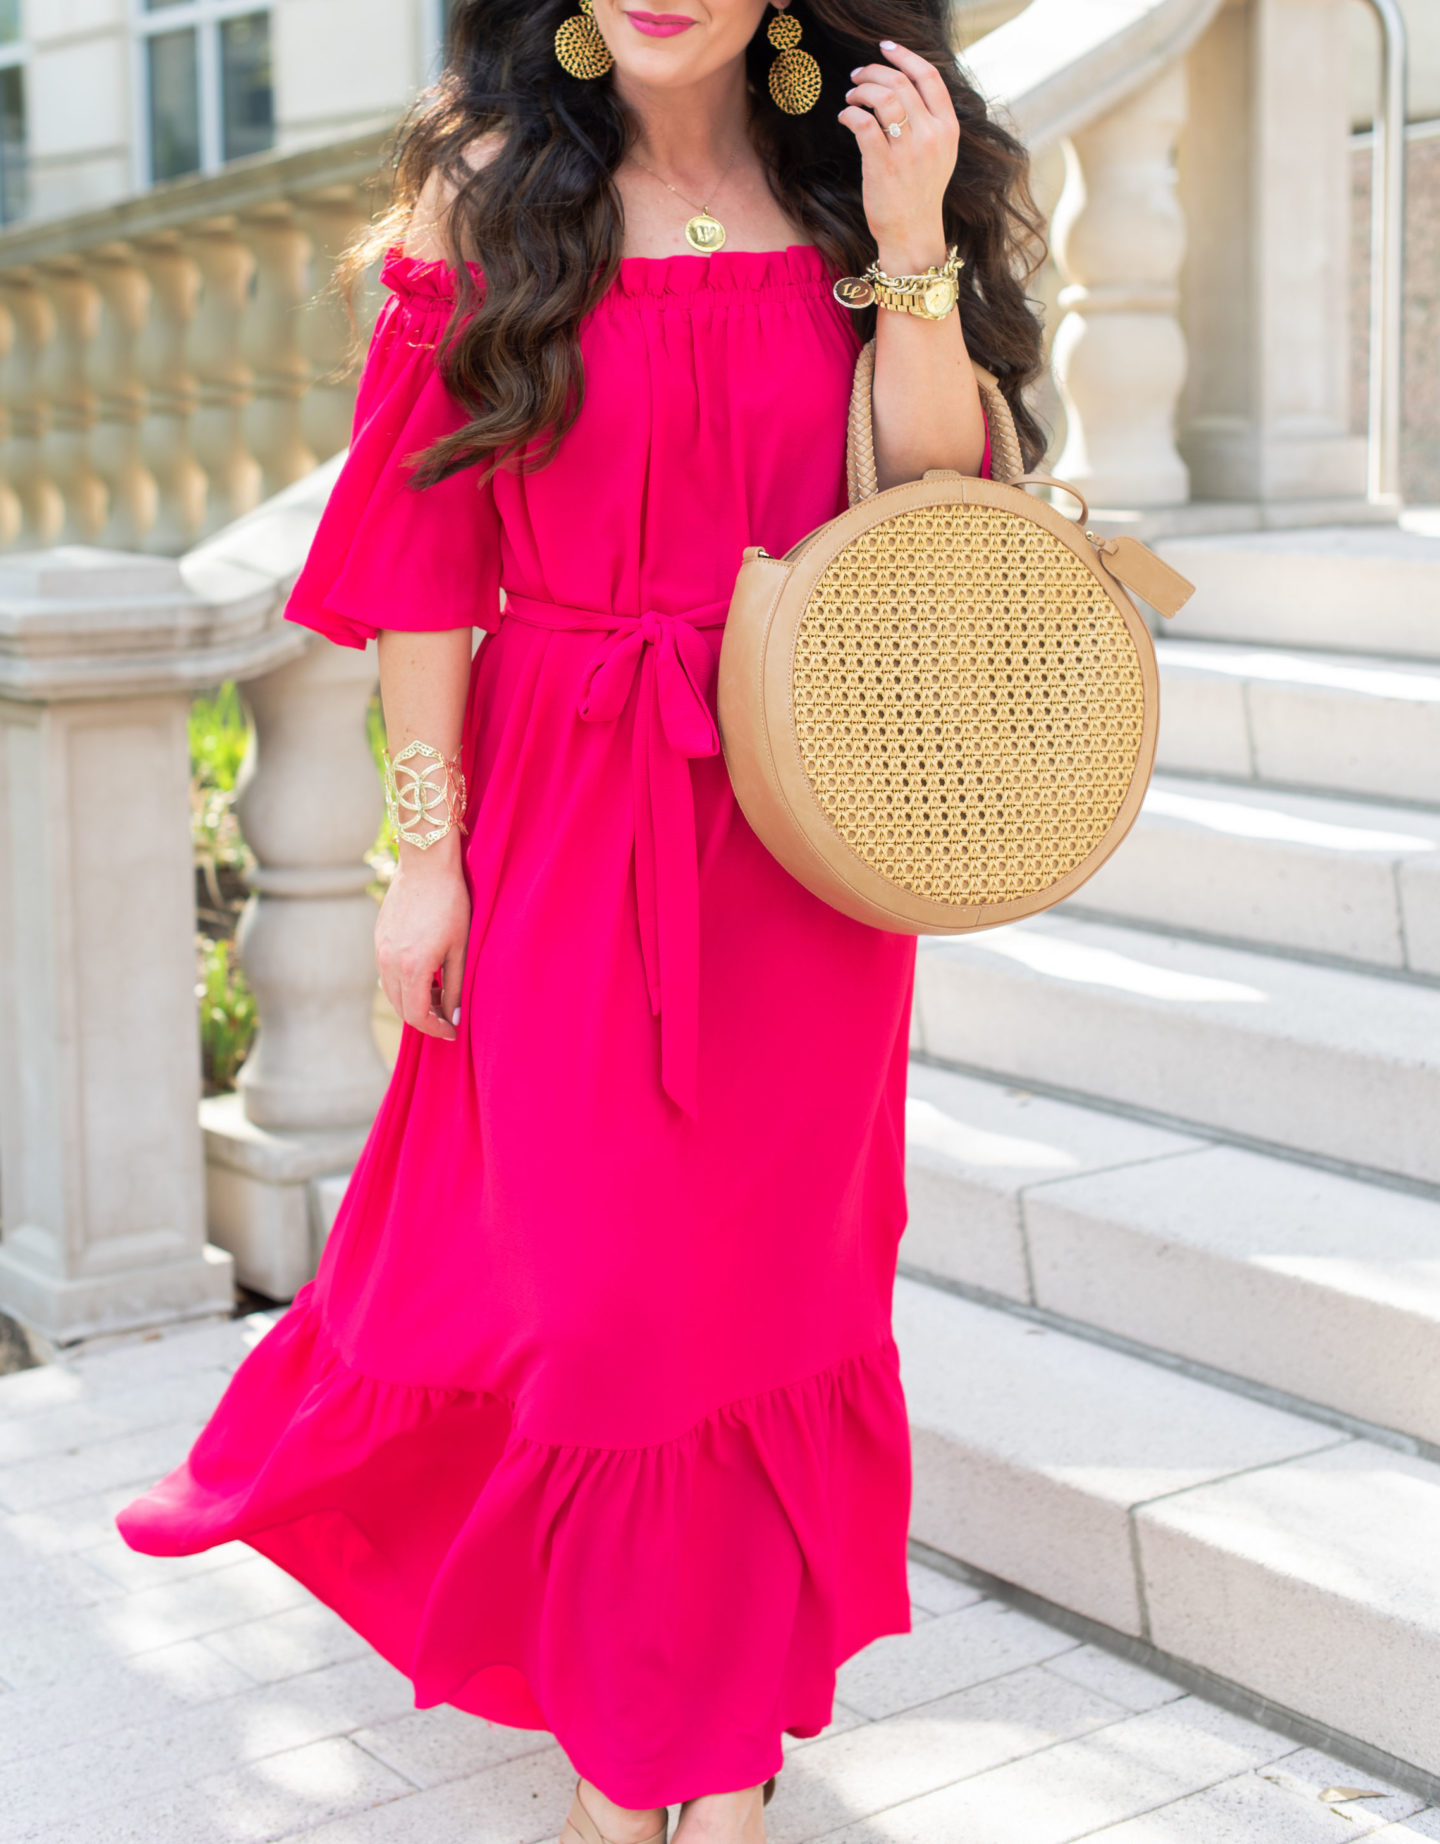 Perfect Vacation Dresses & Bags Under $100 - The Double Take Girls